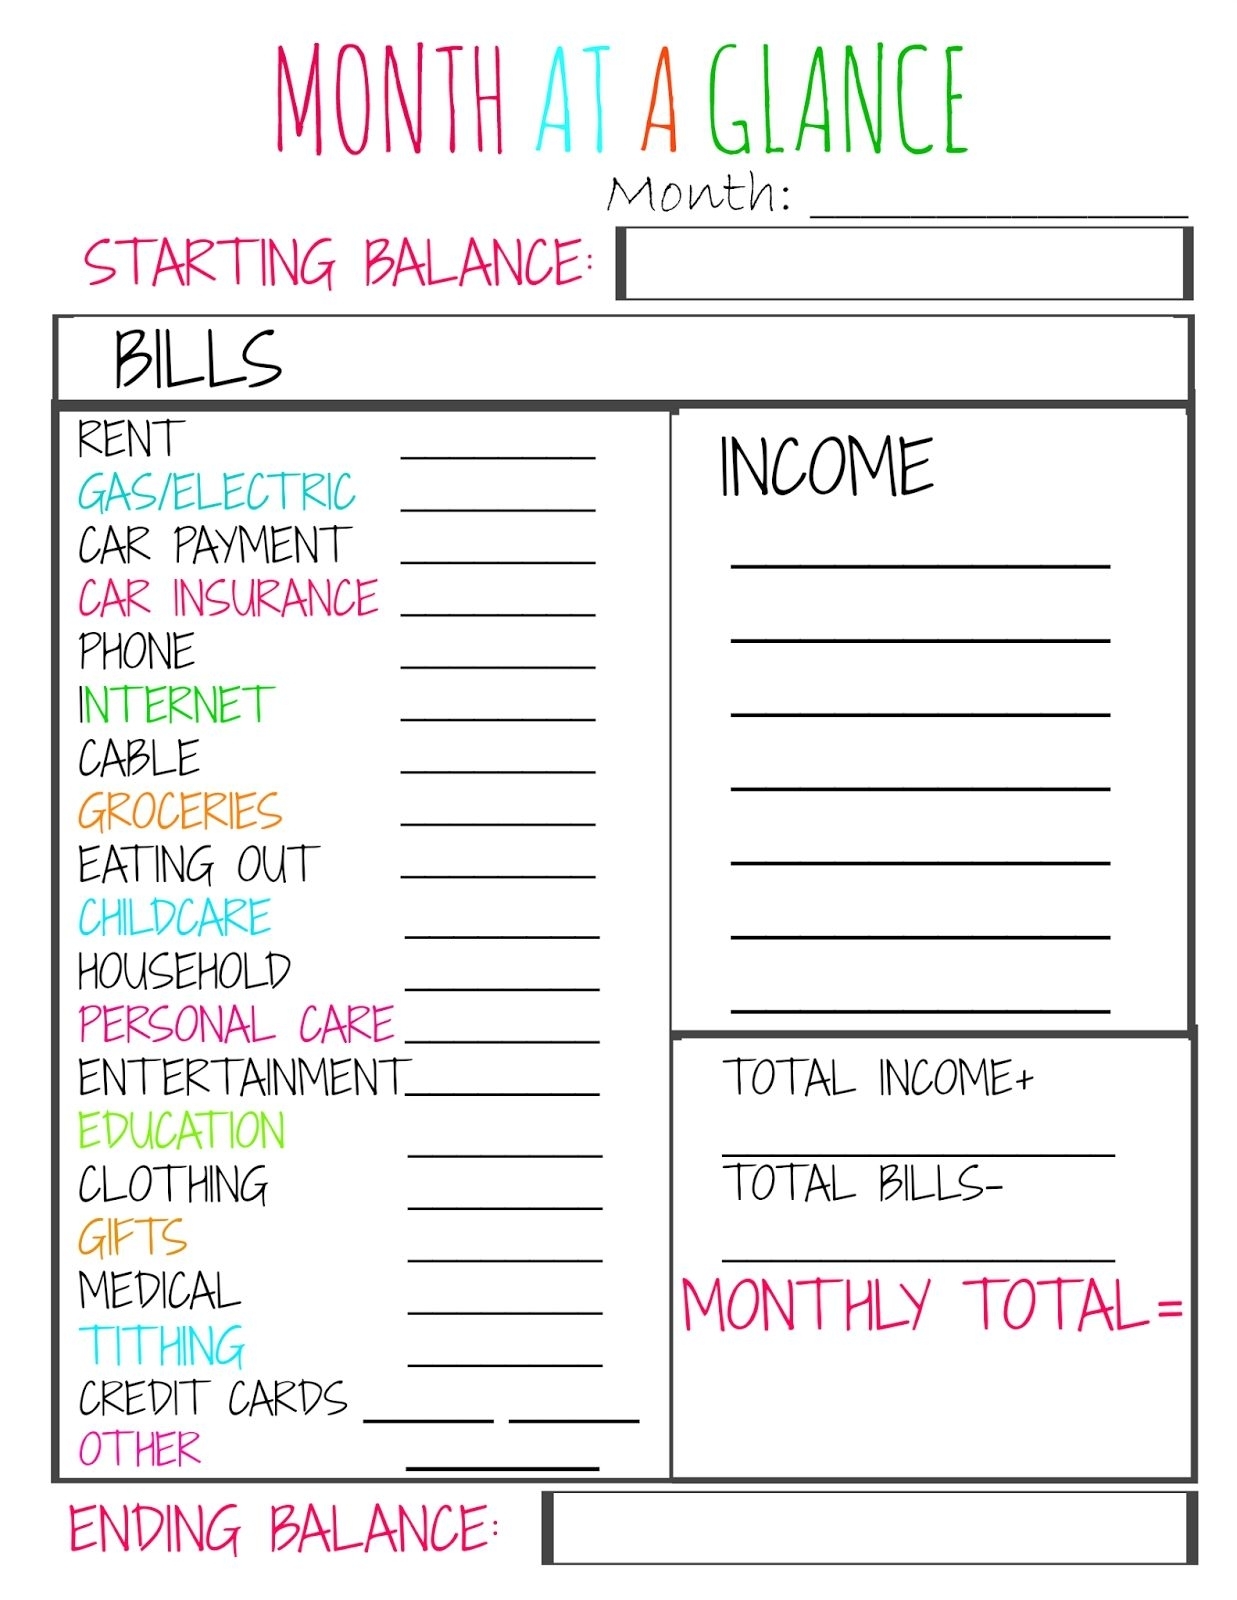 Month At A Glance Budget Worksheet In 2020 | Budget Planning